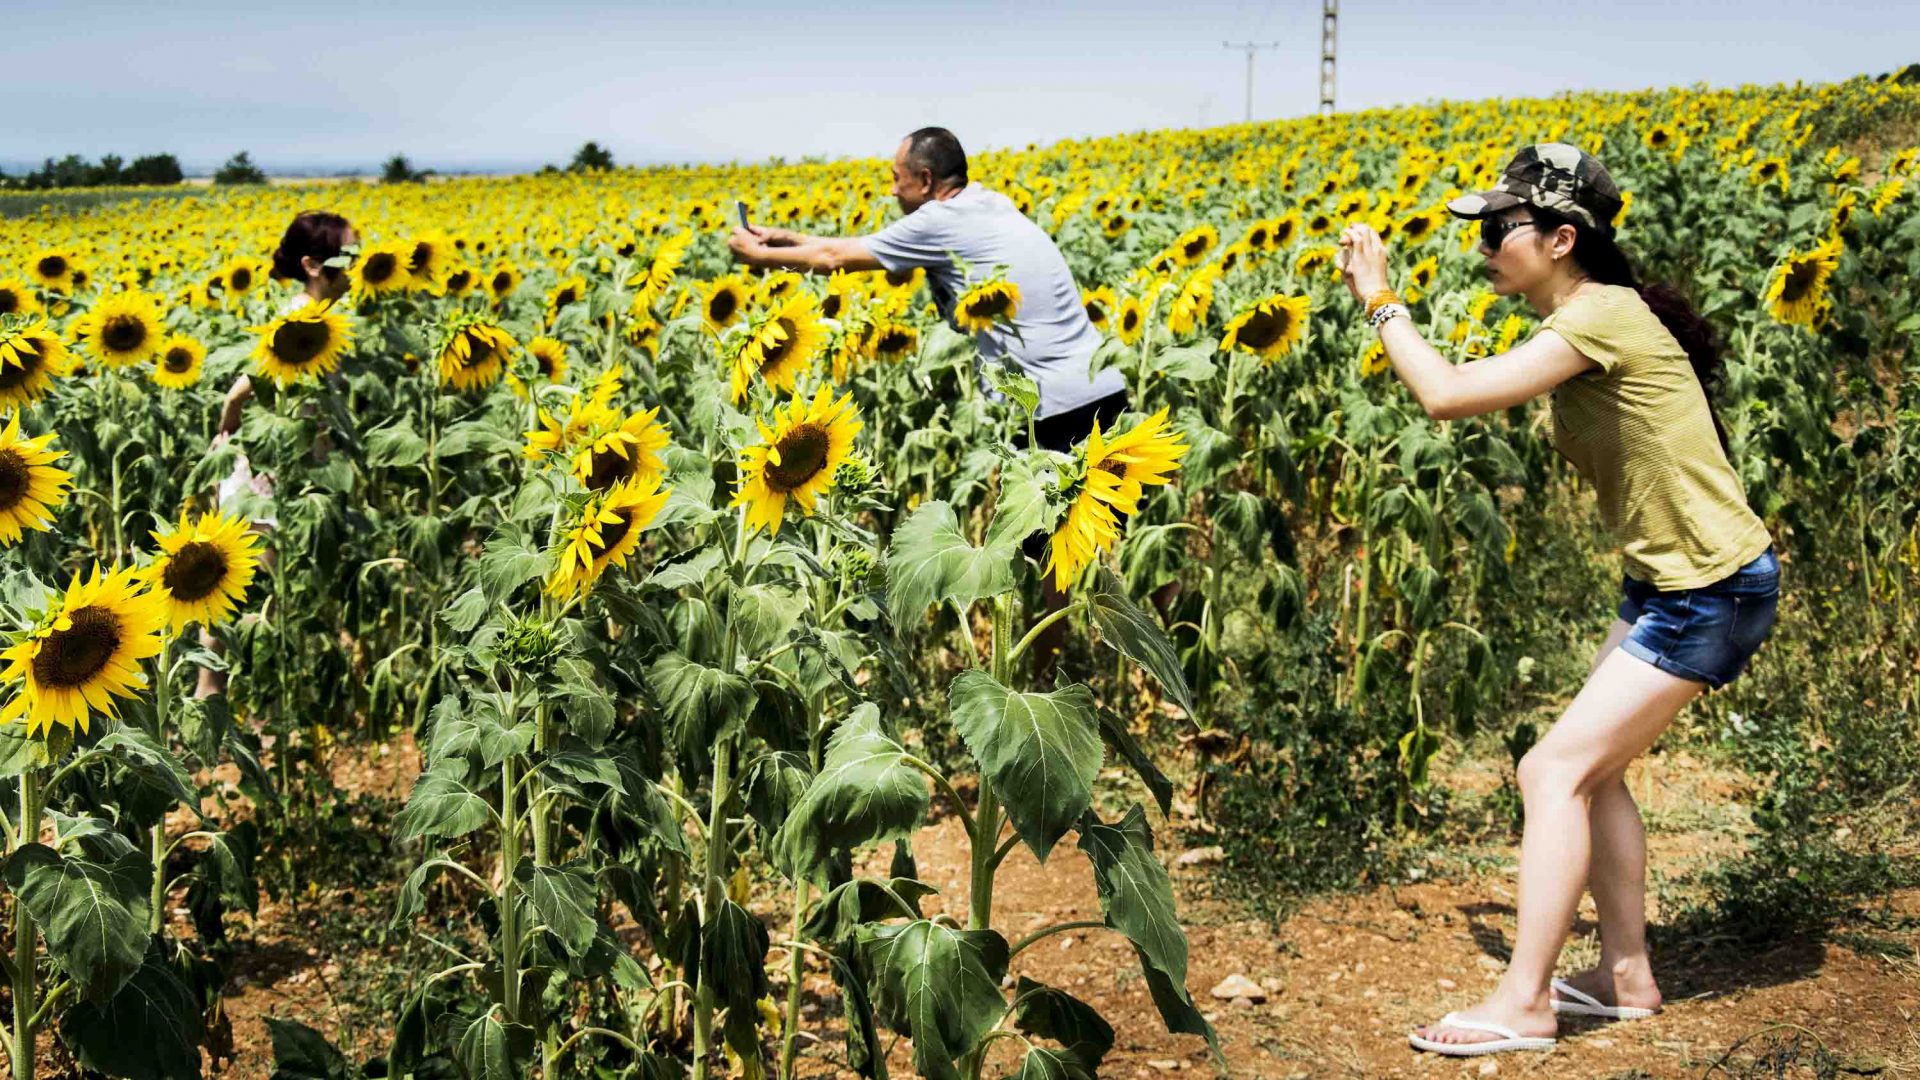 Tourists take photos in amongst sunflowers